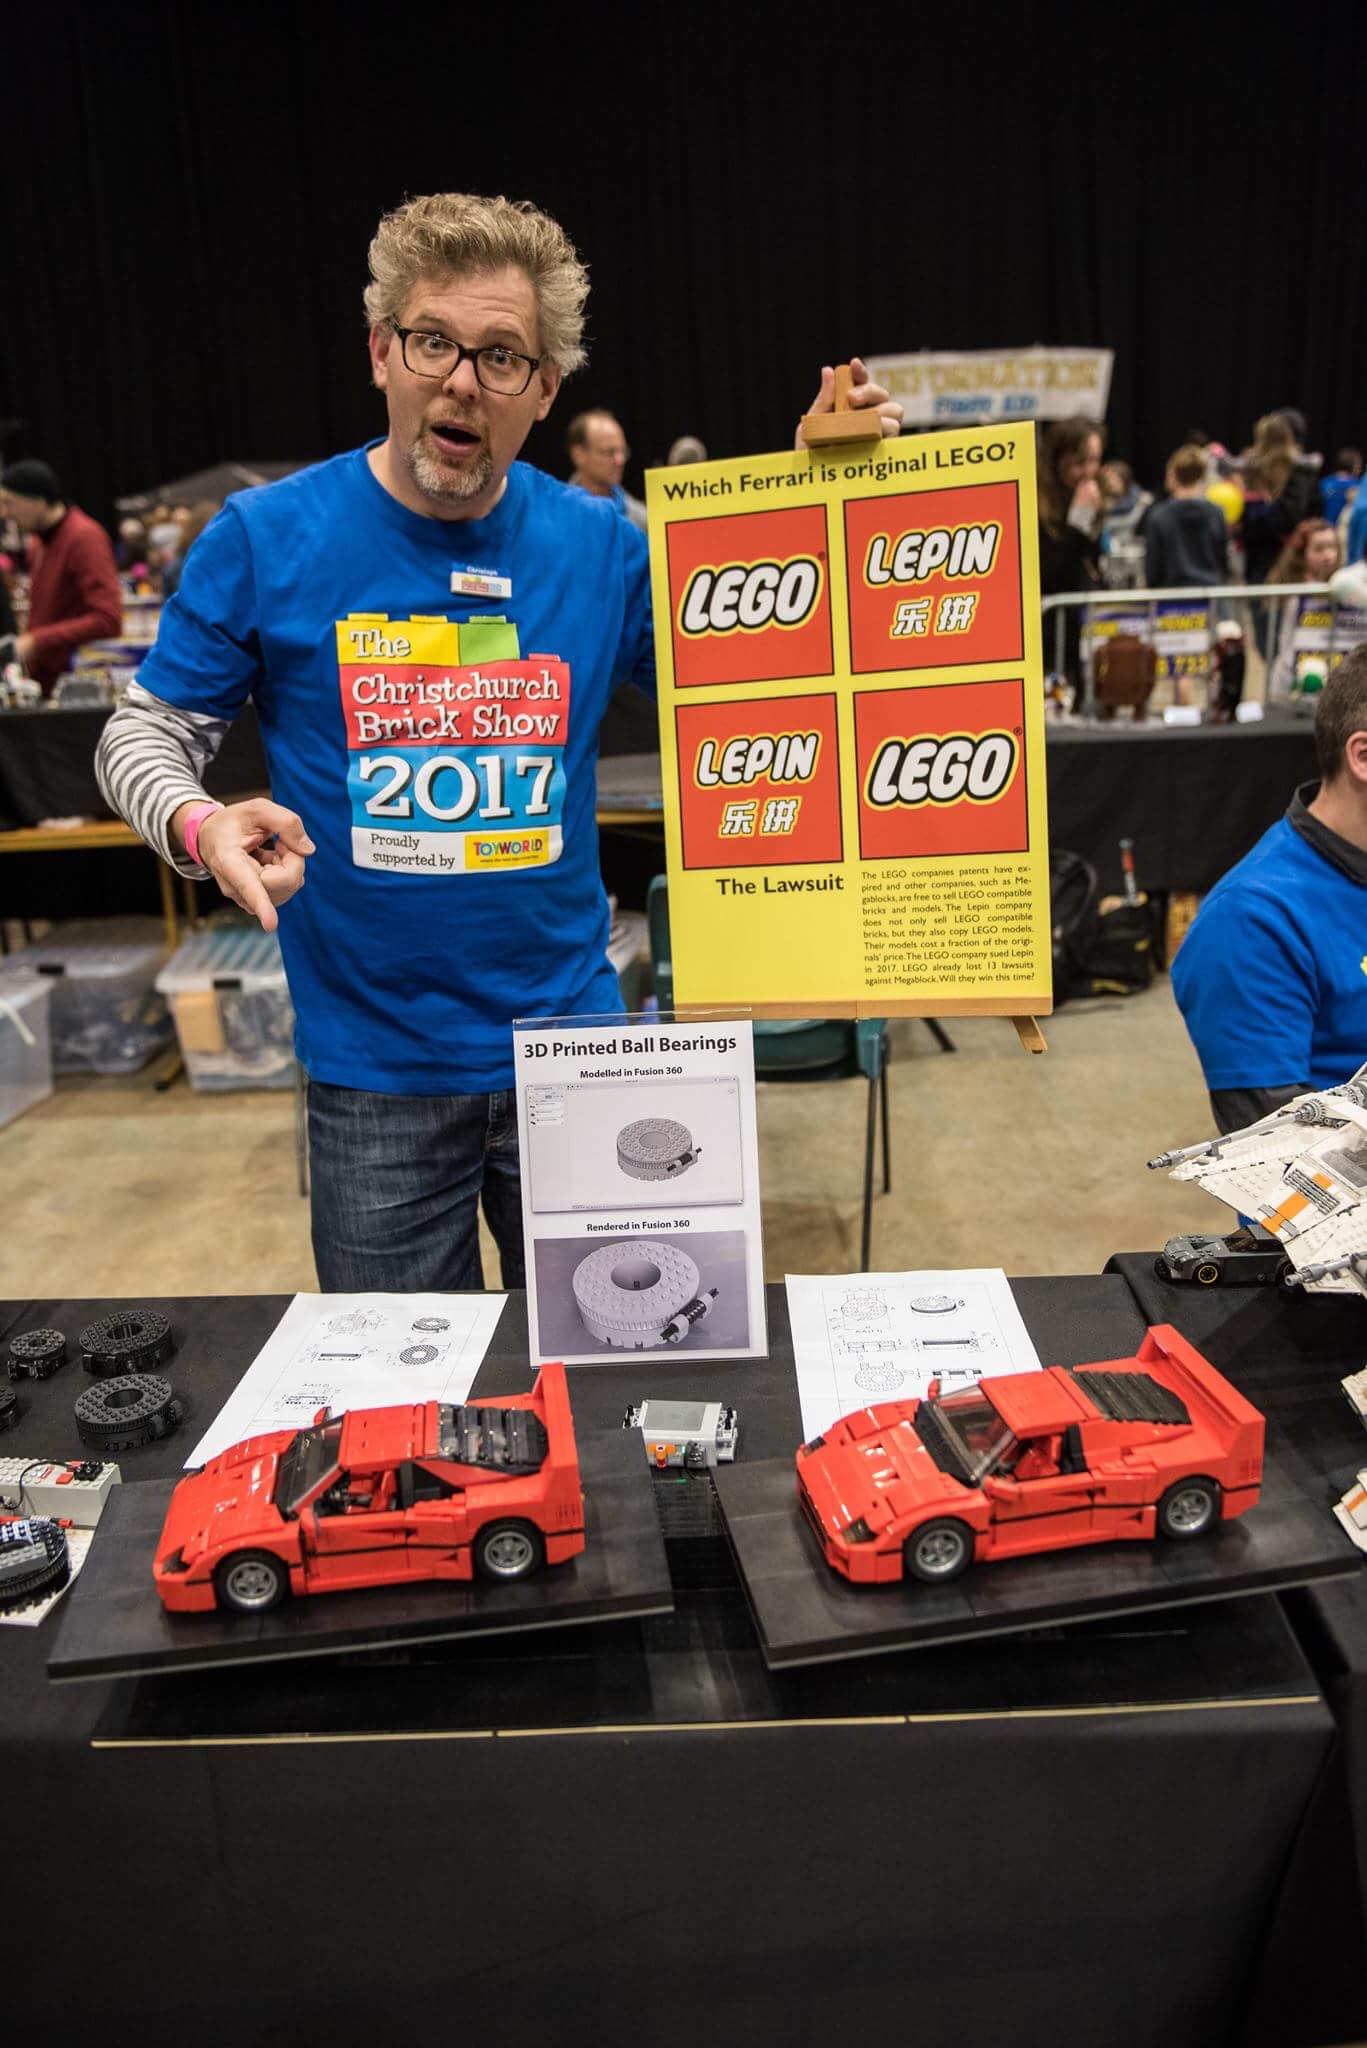 Critical LEPIN exhibit banned from LEGO fan show